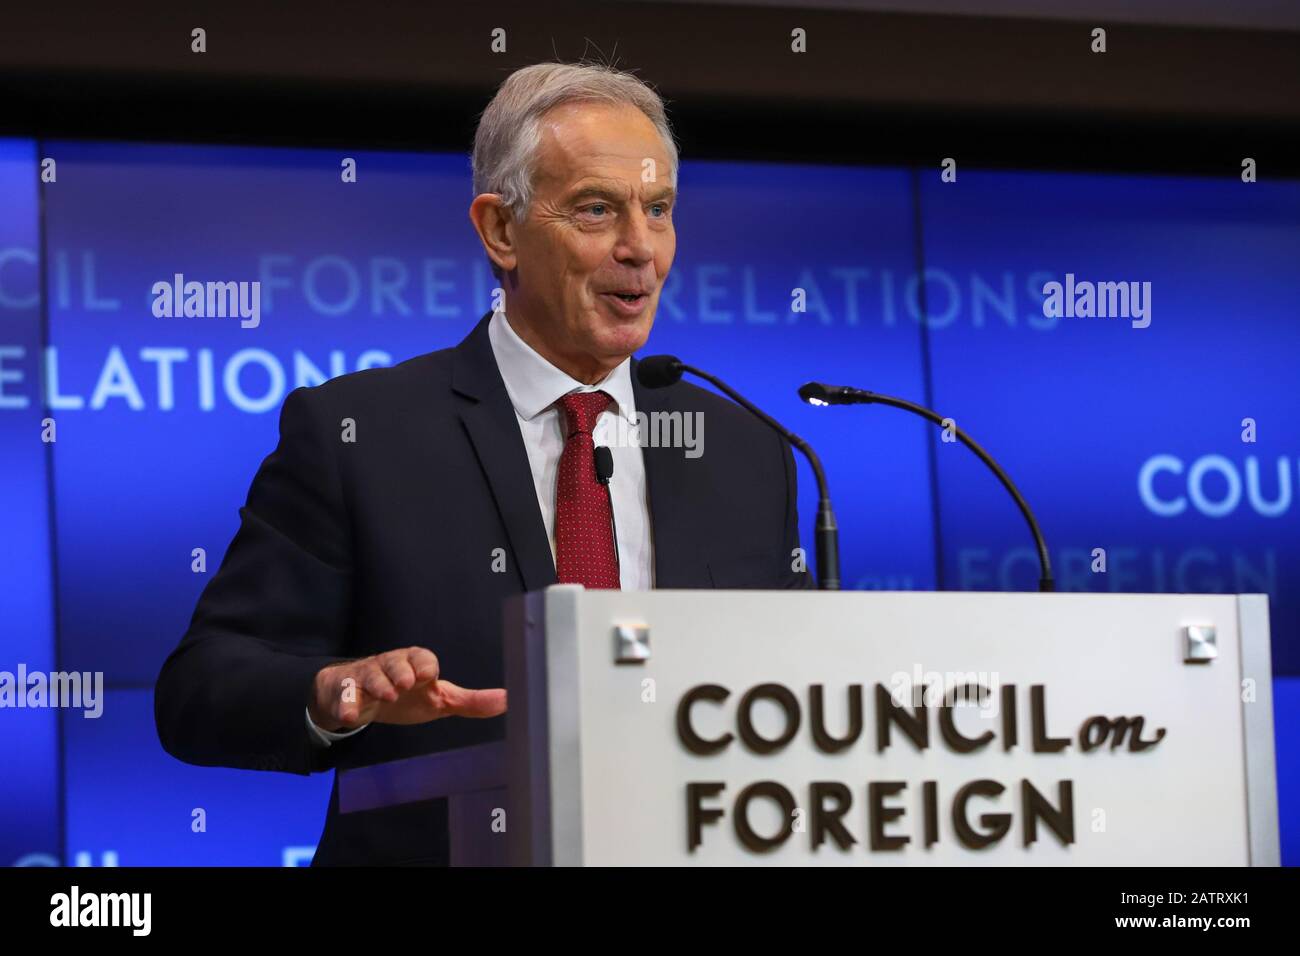 February 4, 2020, New York, New York, United States: Former United Kingdom Prime Minister Tony Blair will discuss the current tensions with Iran and the implications for international policymakers, and the road ahead for the United States and Europe  at the Council on Foreign Relations in New York City, this Tuesday, February 4th (Credit Image: © Vanessa Carvalho/ZUMA Wire) Stock Photo